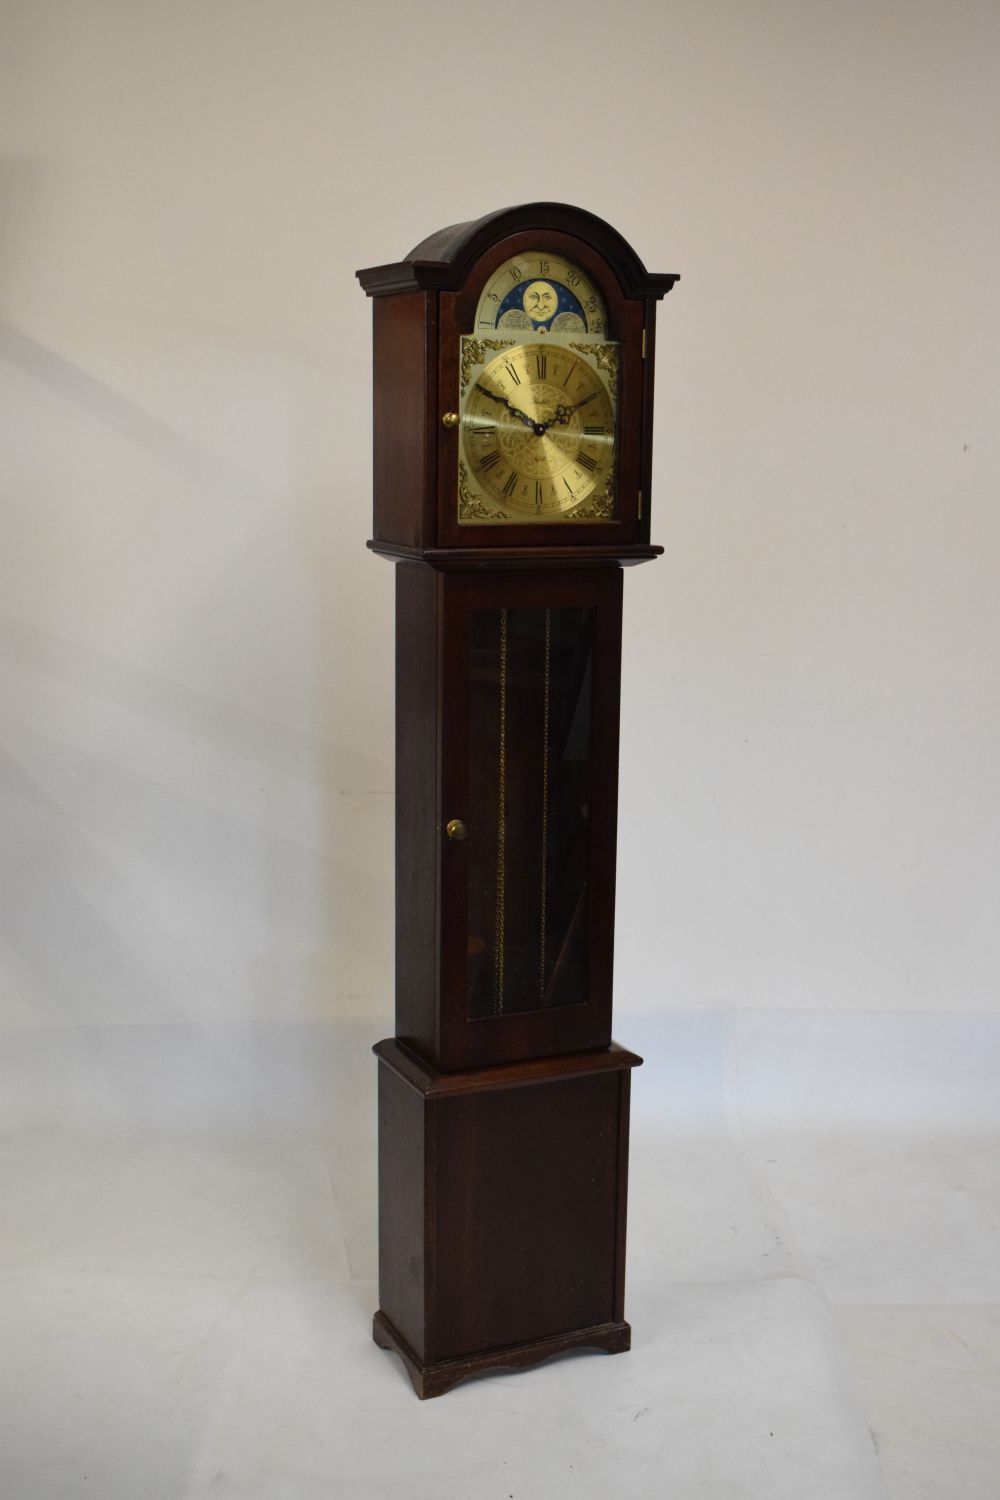 Reproduction mahogany cased chiming grandmother clock by Fenclocks, Suffolk, 179.5cm high - Image 3 of 6